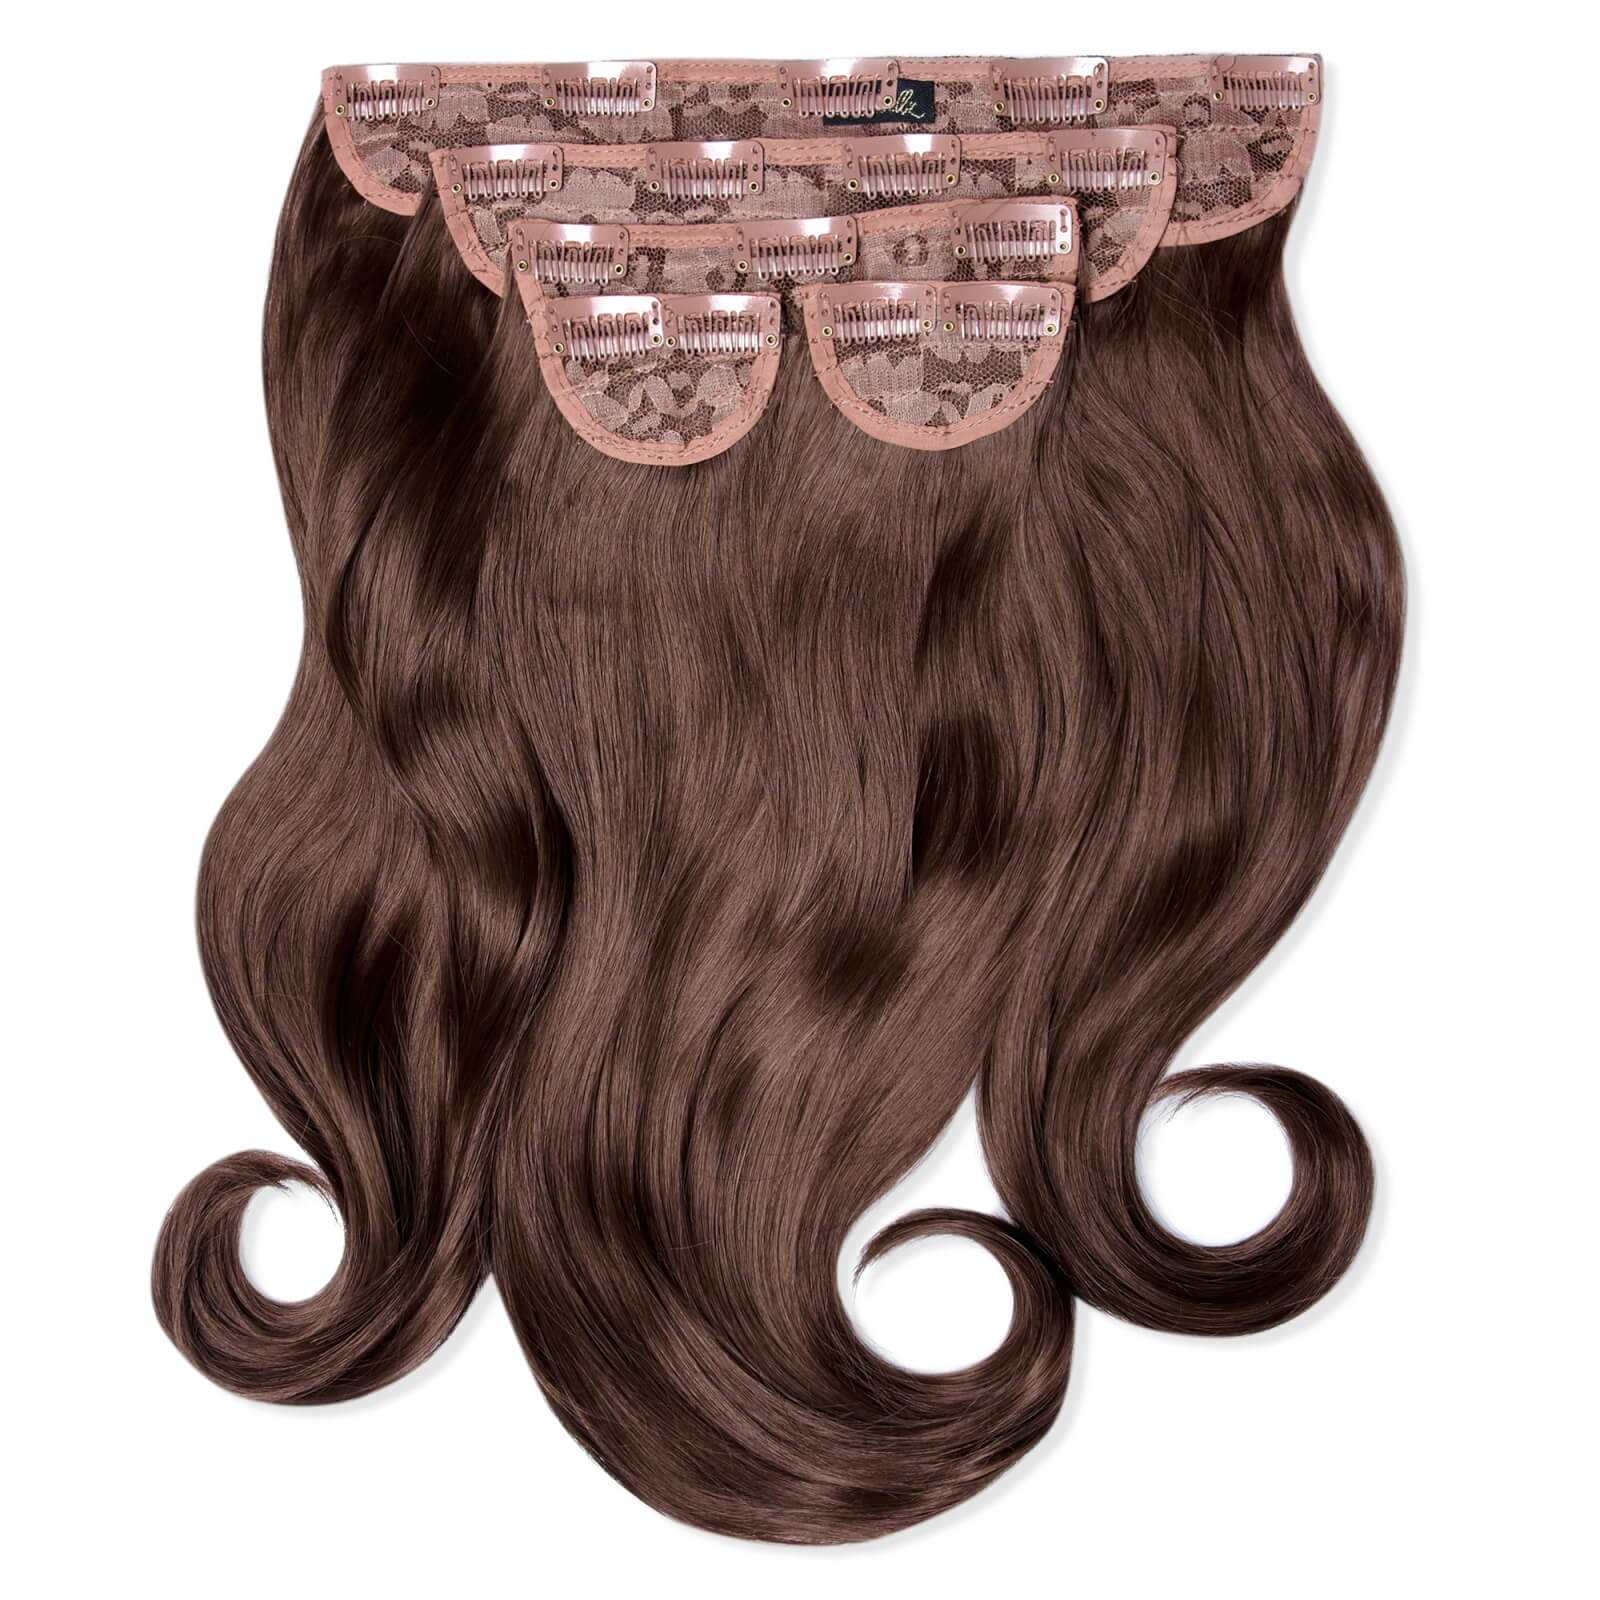 Lullabellz Super Thick 16  5 Piece Blow Dry Wavy Clip In Extensions (various Shades) - Chestnut